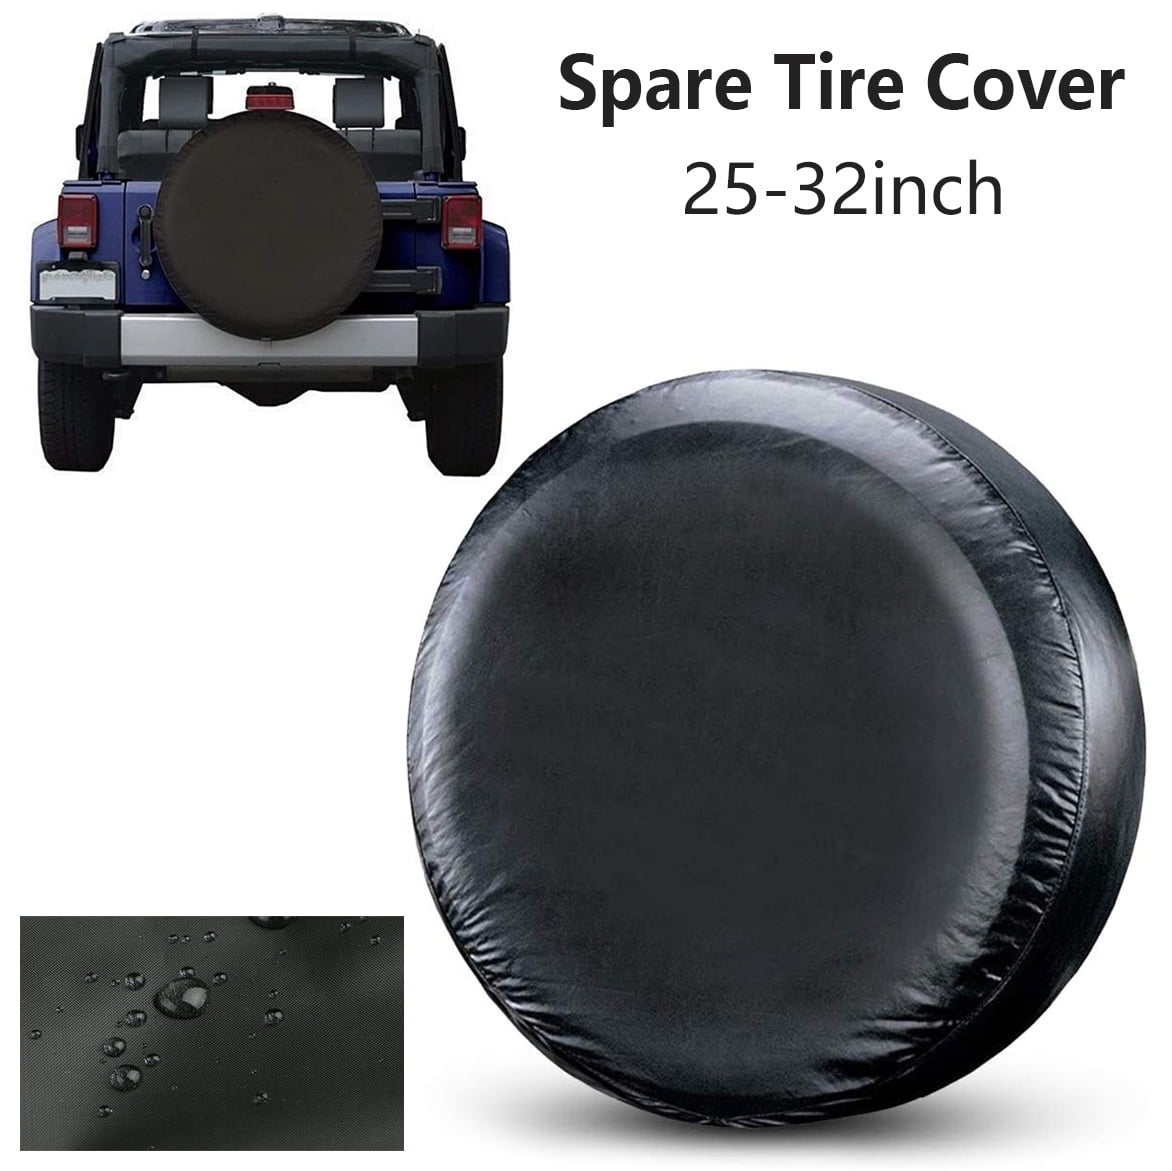 RV Audew Spare Tire Cover Soft Vinyl Water-Proof Wheel Tire Cover Universal Fit for Jeep SUV Truck 28 Black Truck 28 Black Trailer 